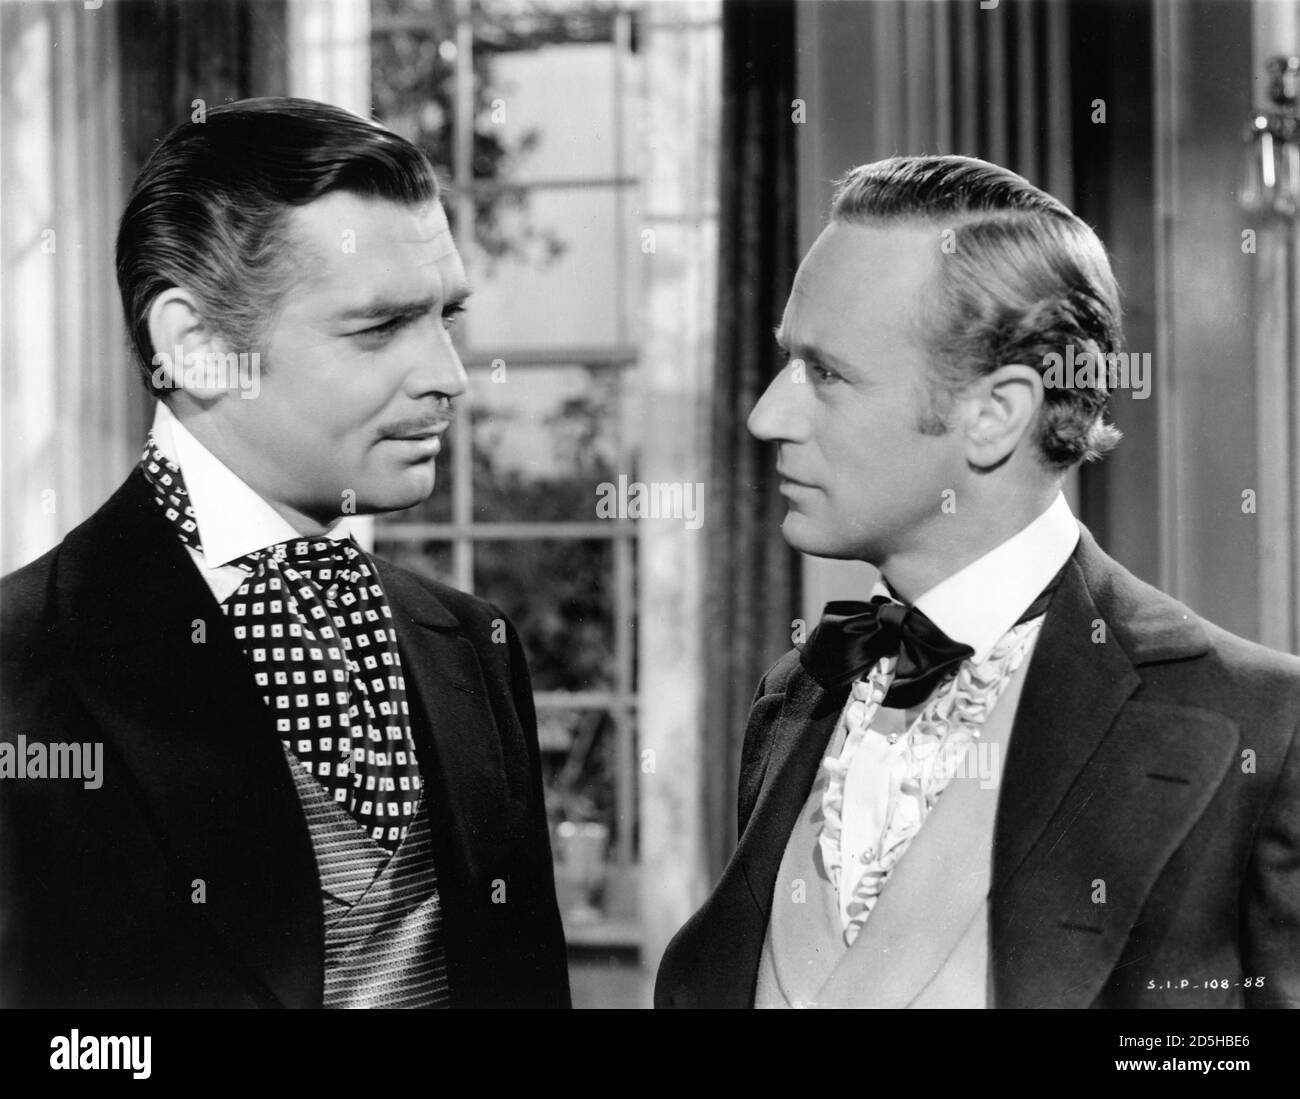 CLARK GABLE and LESLIE HOWARD in GONE WITH THE WIND 1939 director VICTOR FLEMING novel Margaret Mitchell music Max Steiner costumes Walter Plunkett  producer David O. Selznick Selznick International Pictures / Metro Goldwyn Mayer Stock Photo